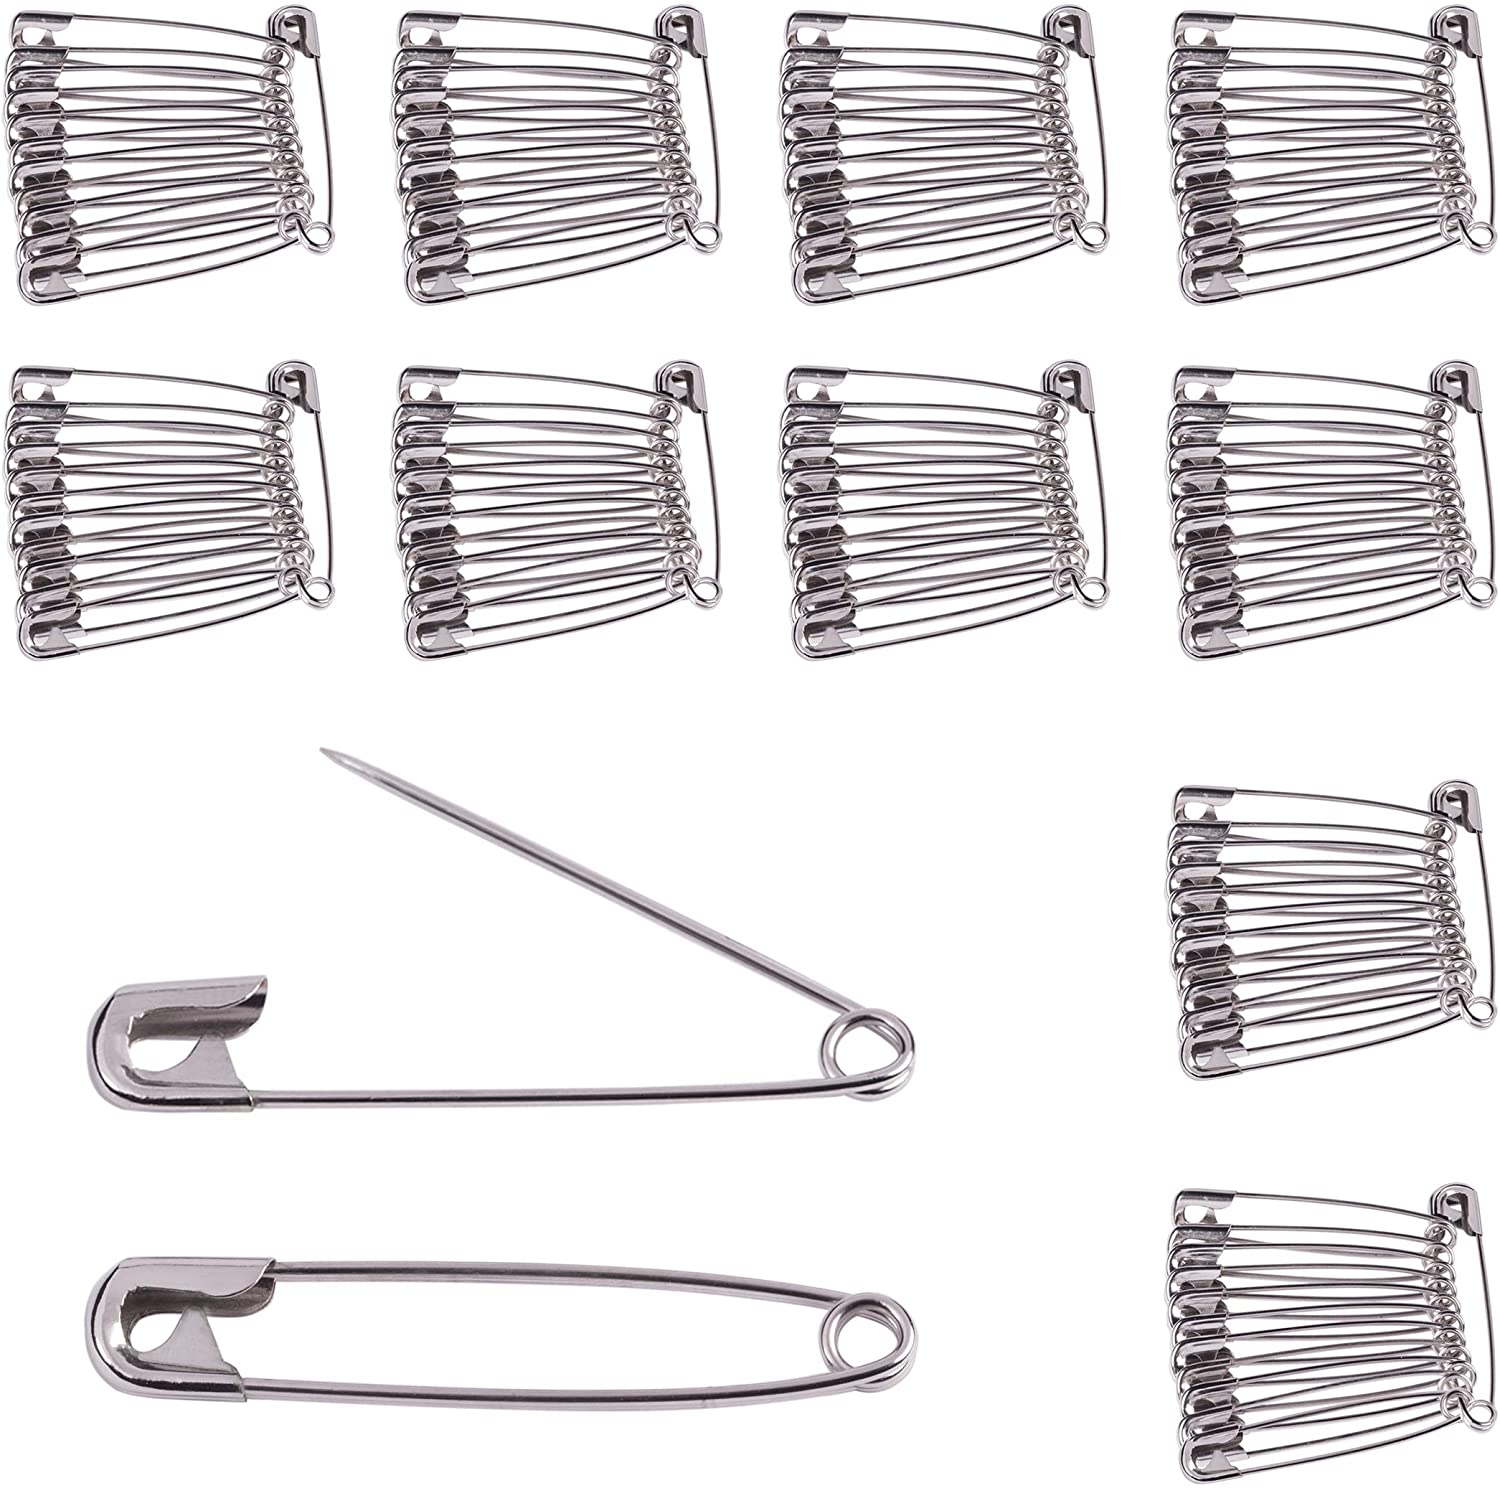 BEADNOVA Small Safety Pins Size 1 Nickel Finish Clothing Pins Safety Pins  for Clothes Garment Art Craft (120pcs, 1.1 Inch, 28mm) - Beadnova